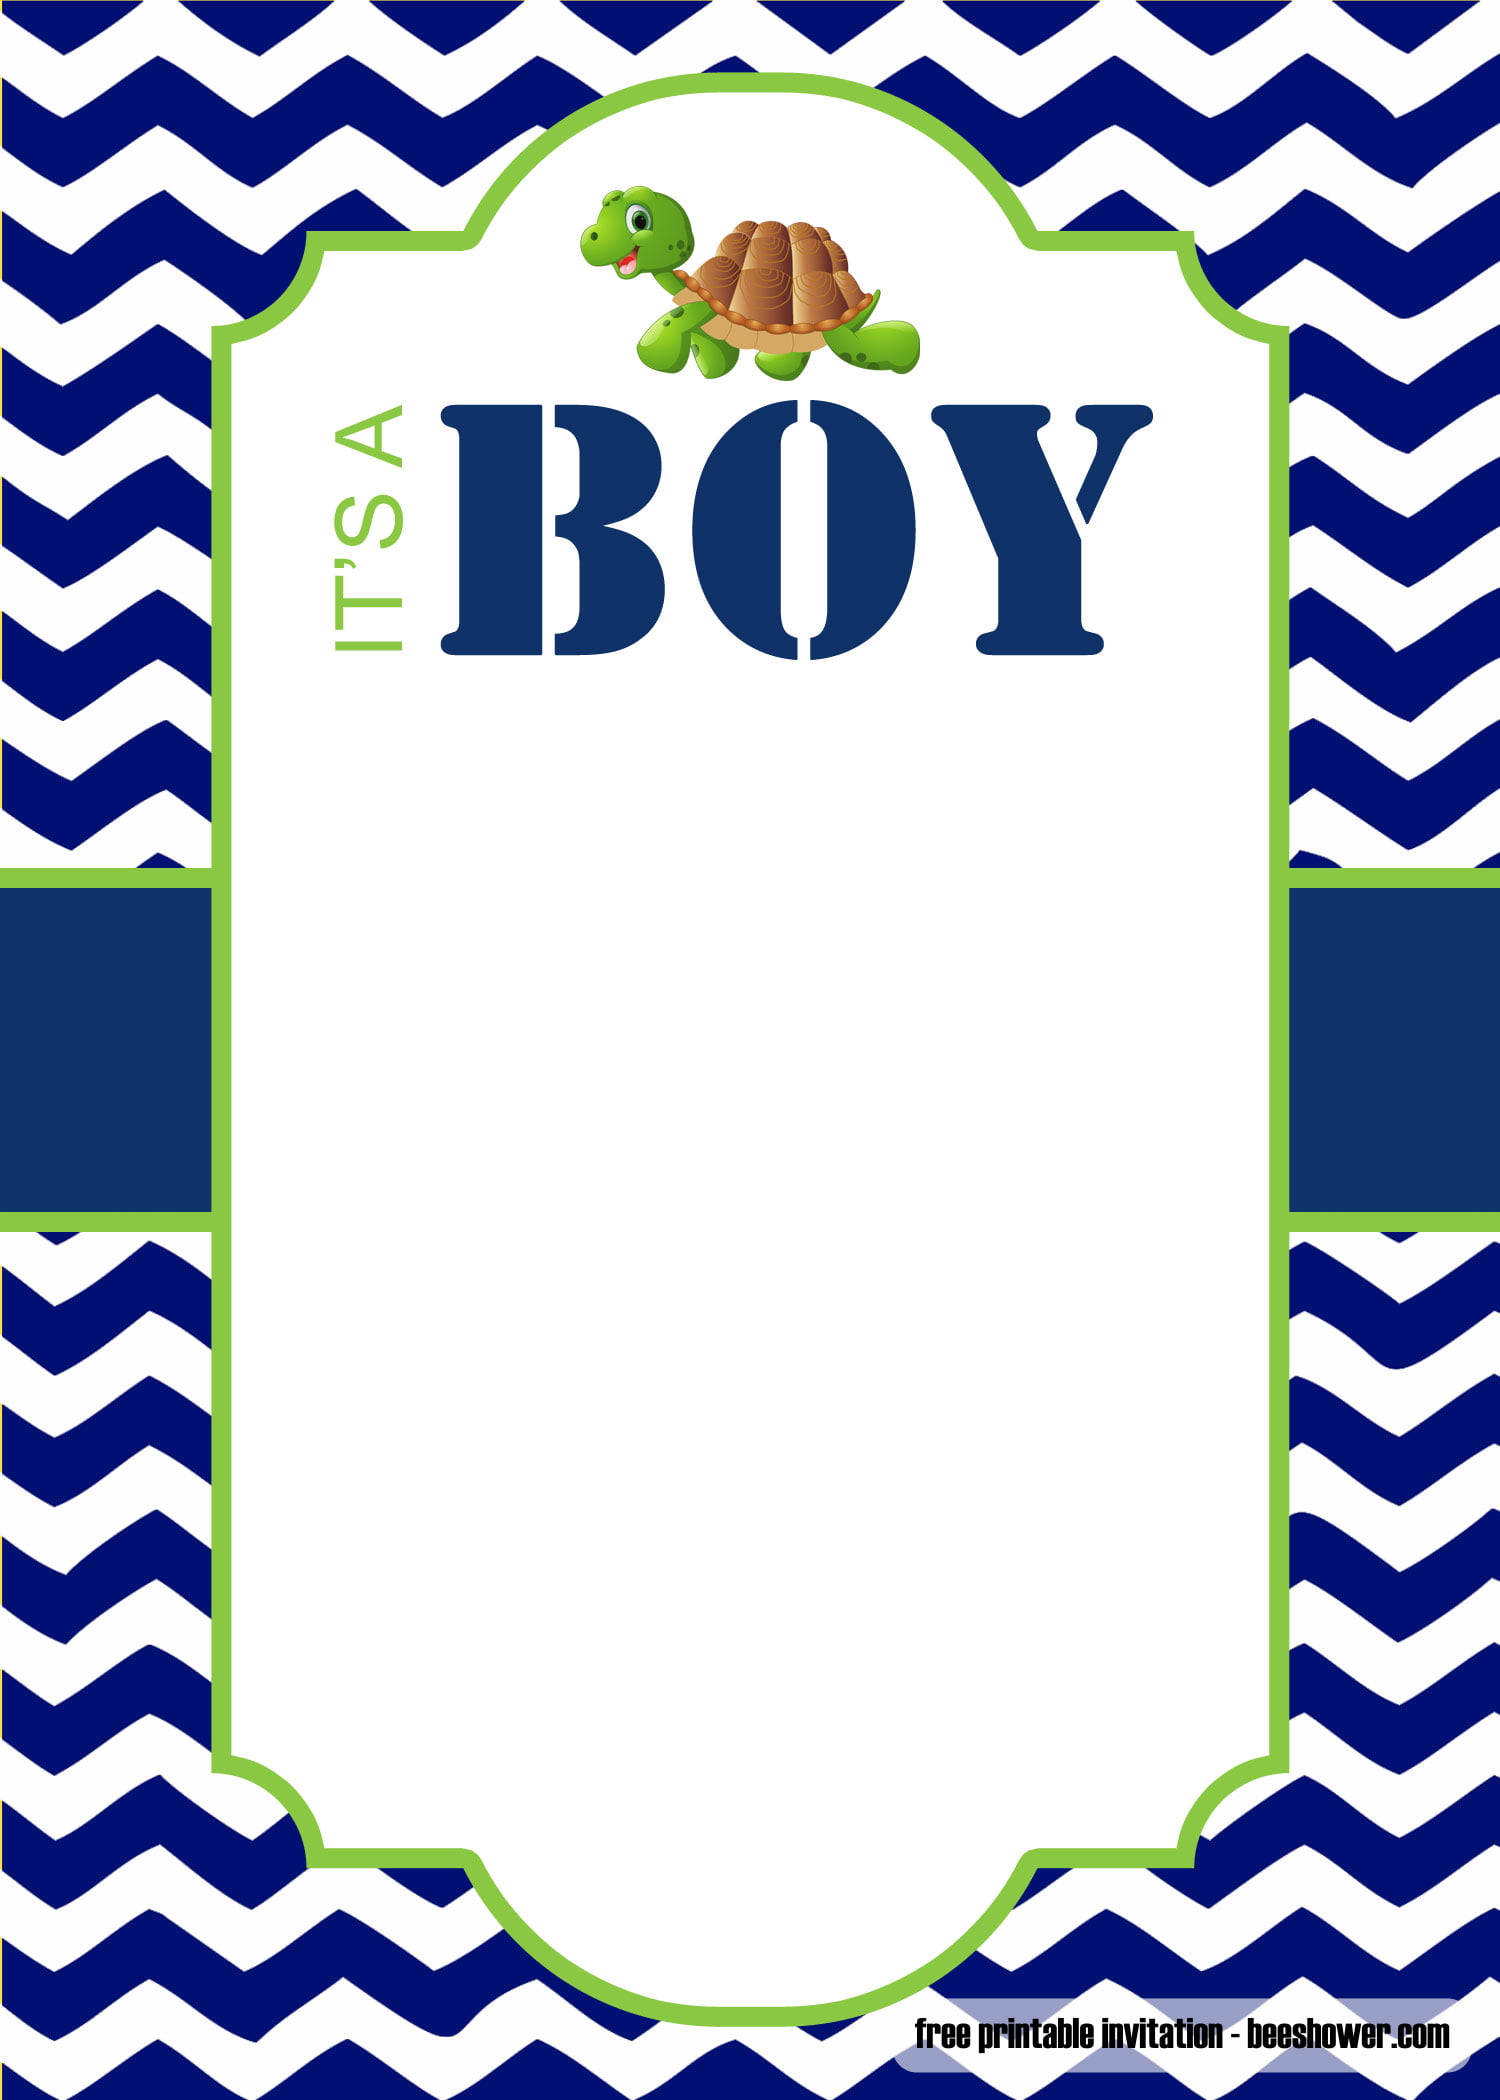 baby shower invitation template for a boy